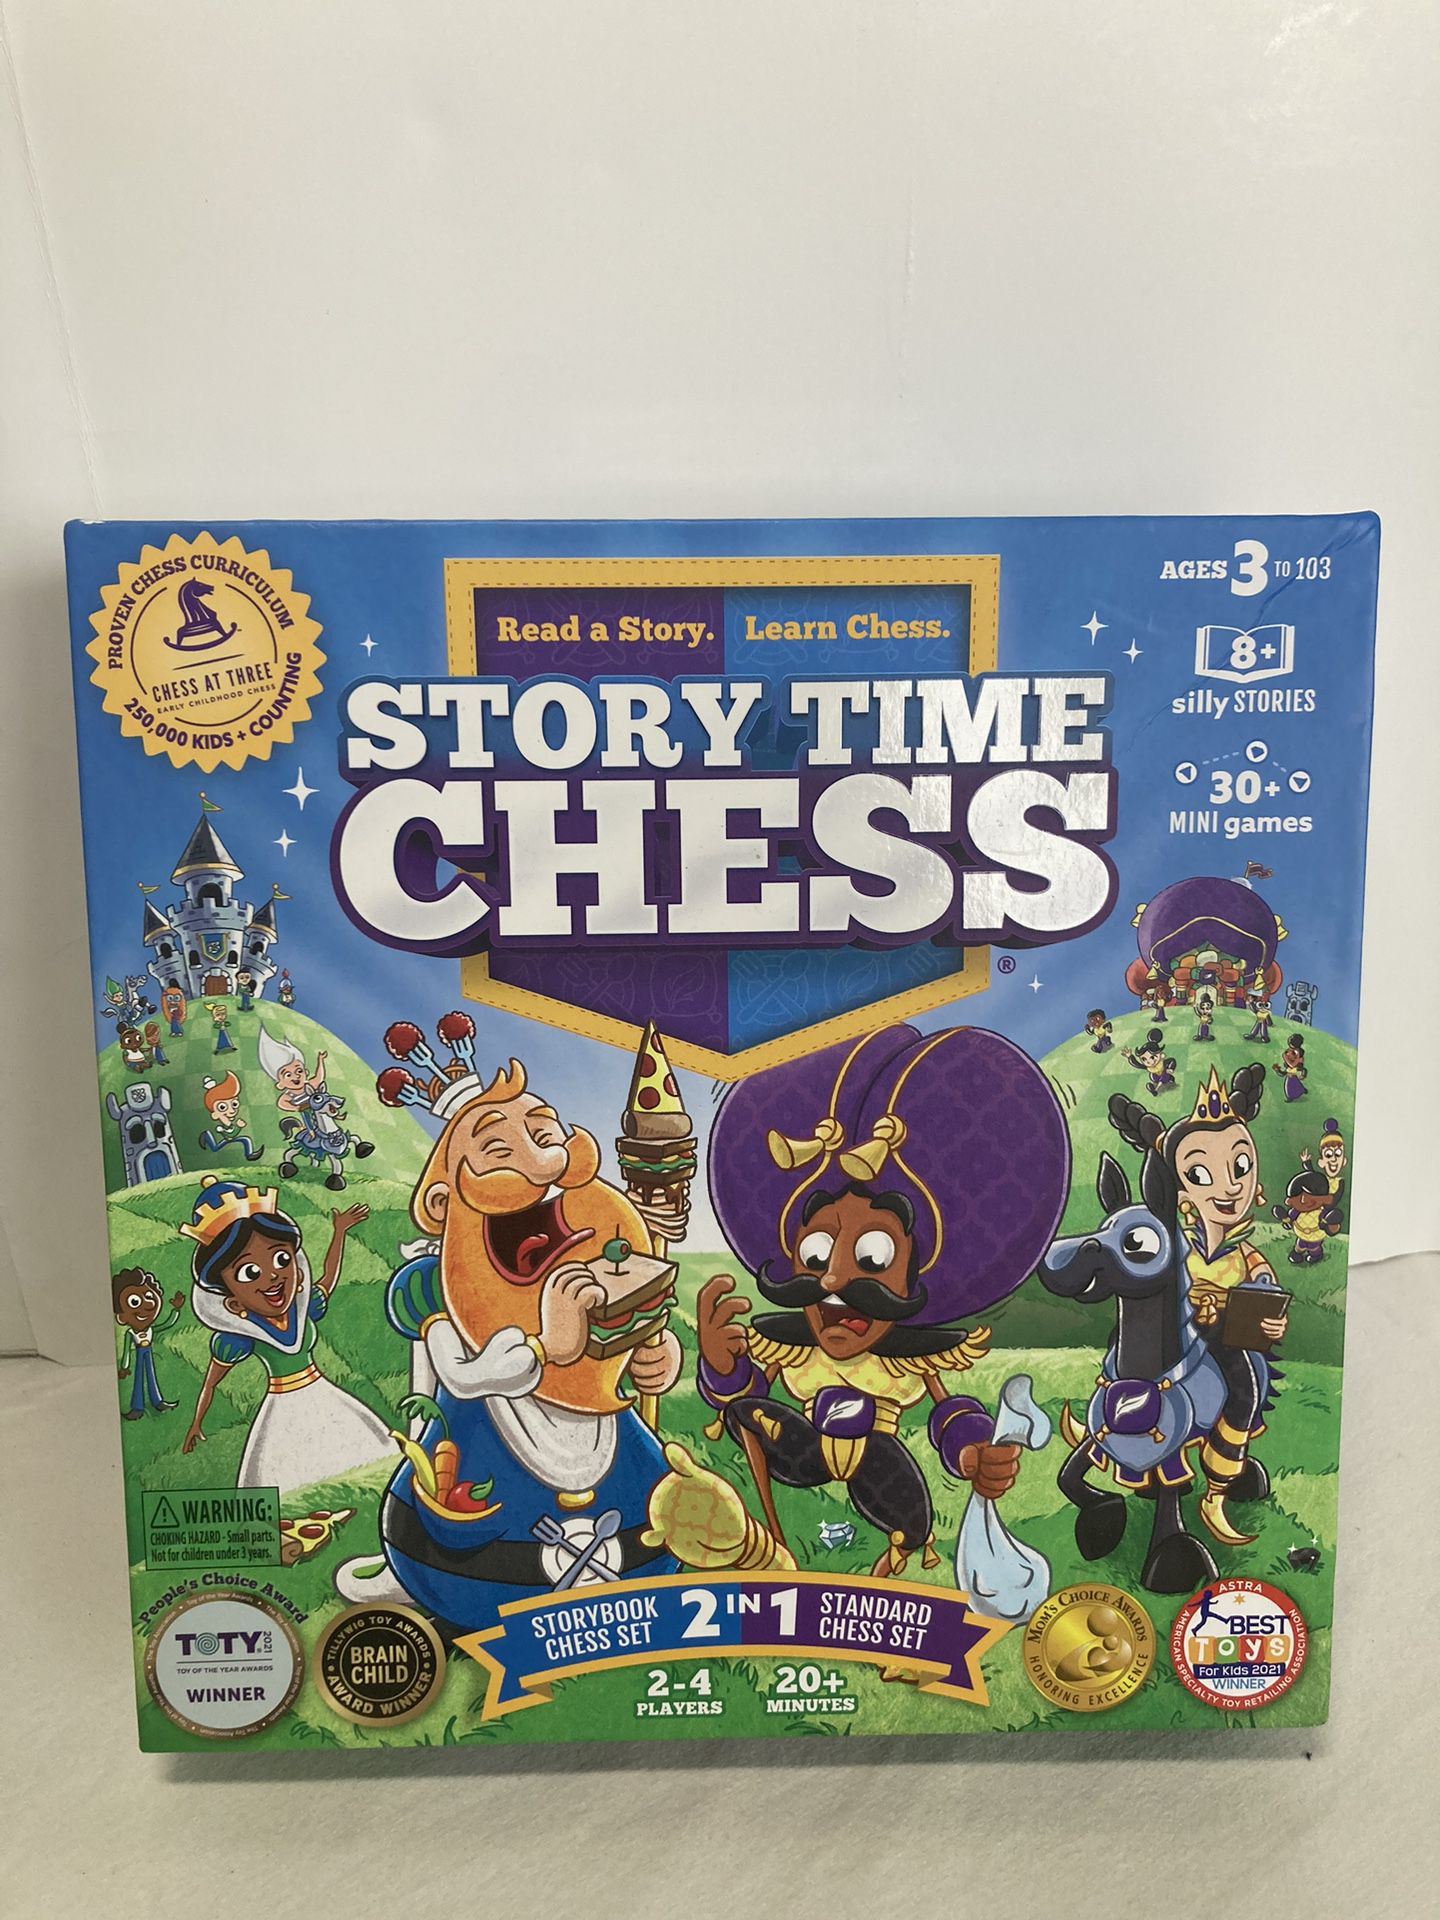 Story Time Chess - 2021 Toy of The Year Award Winner - Chess Sets for Kids NEW